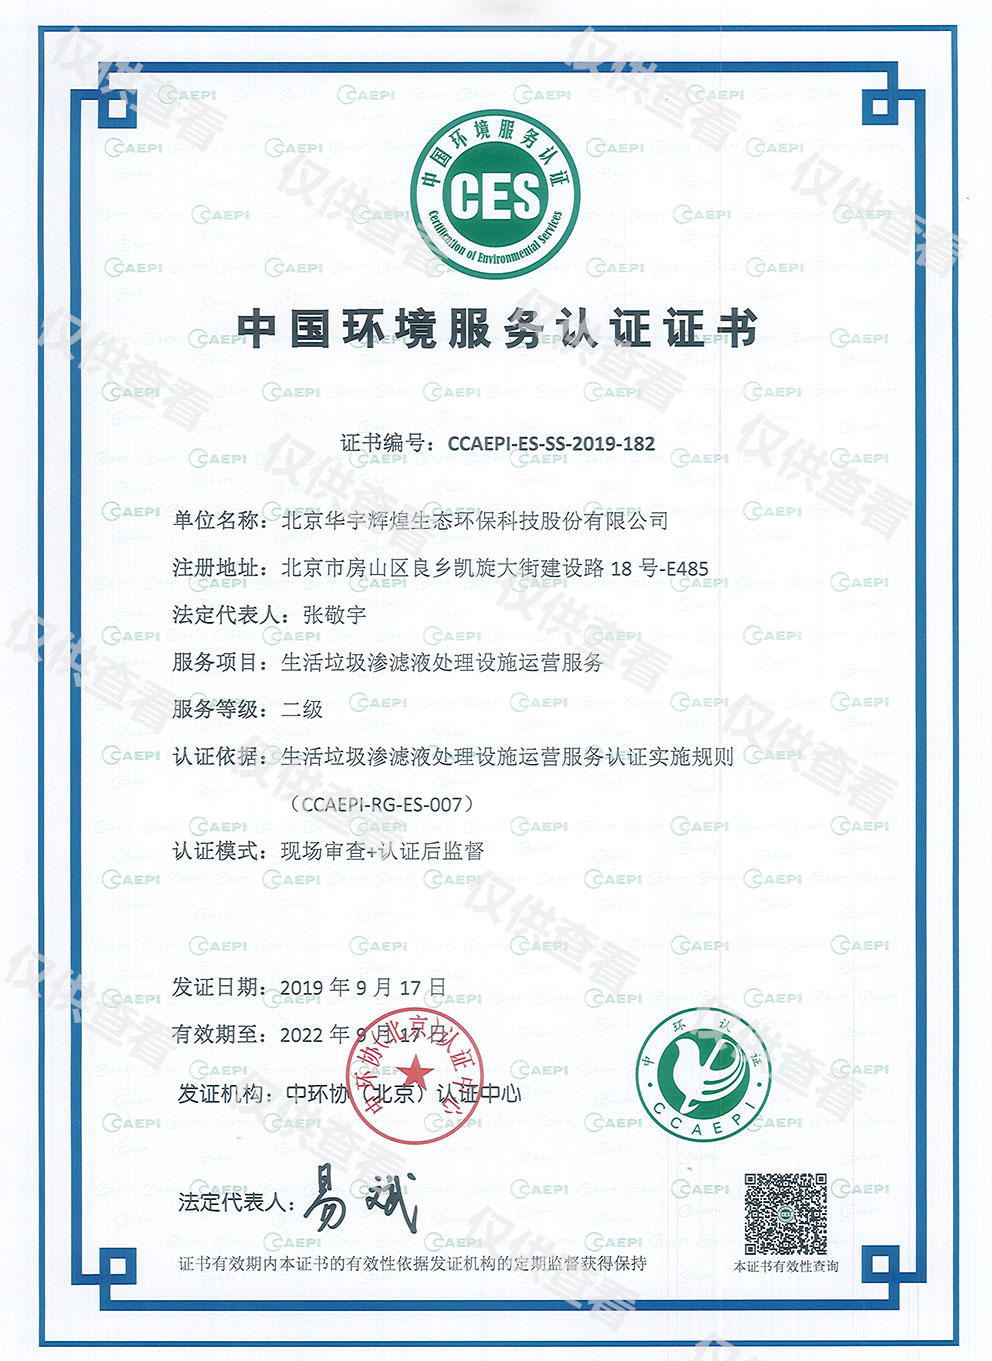 Second class operation service of domestic waste leachate treatment equipment